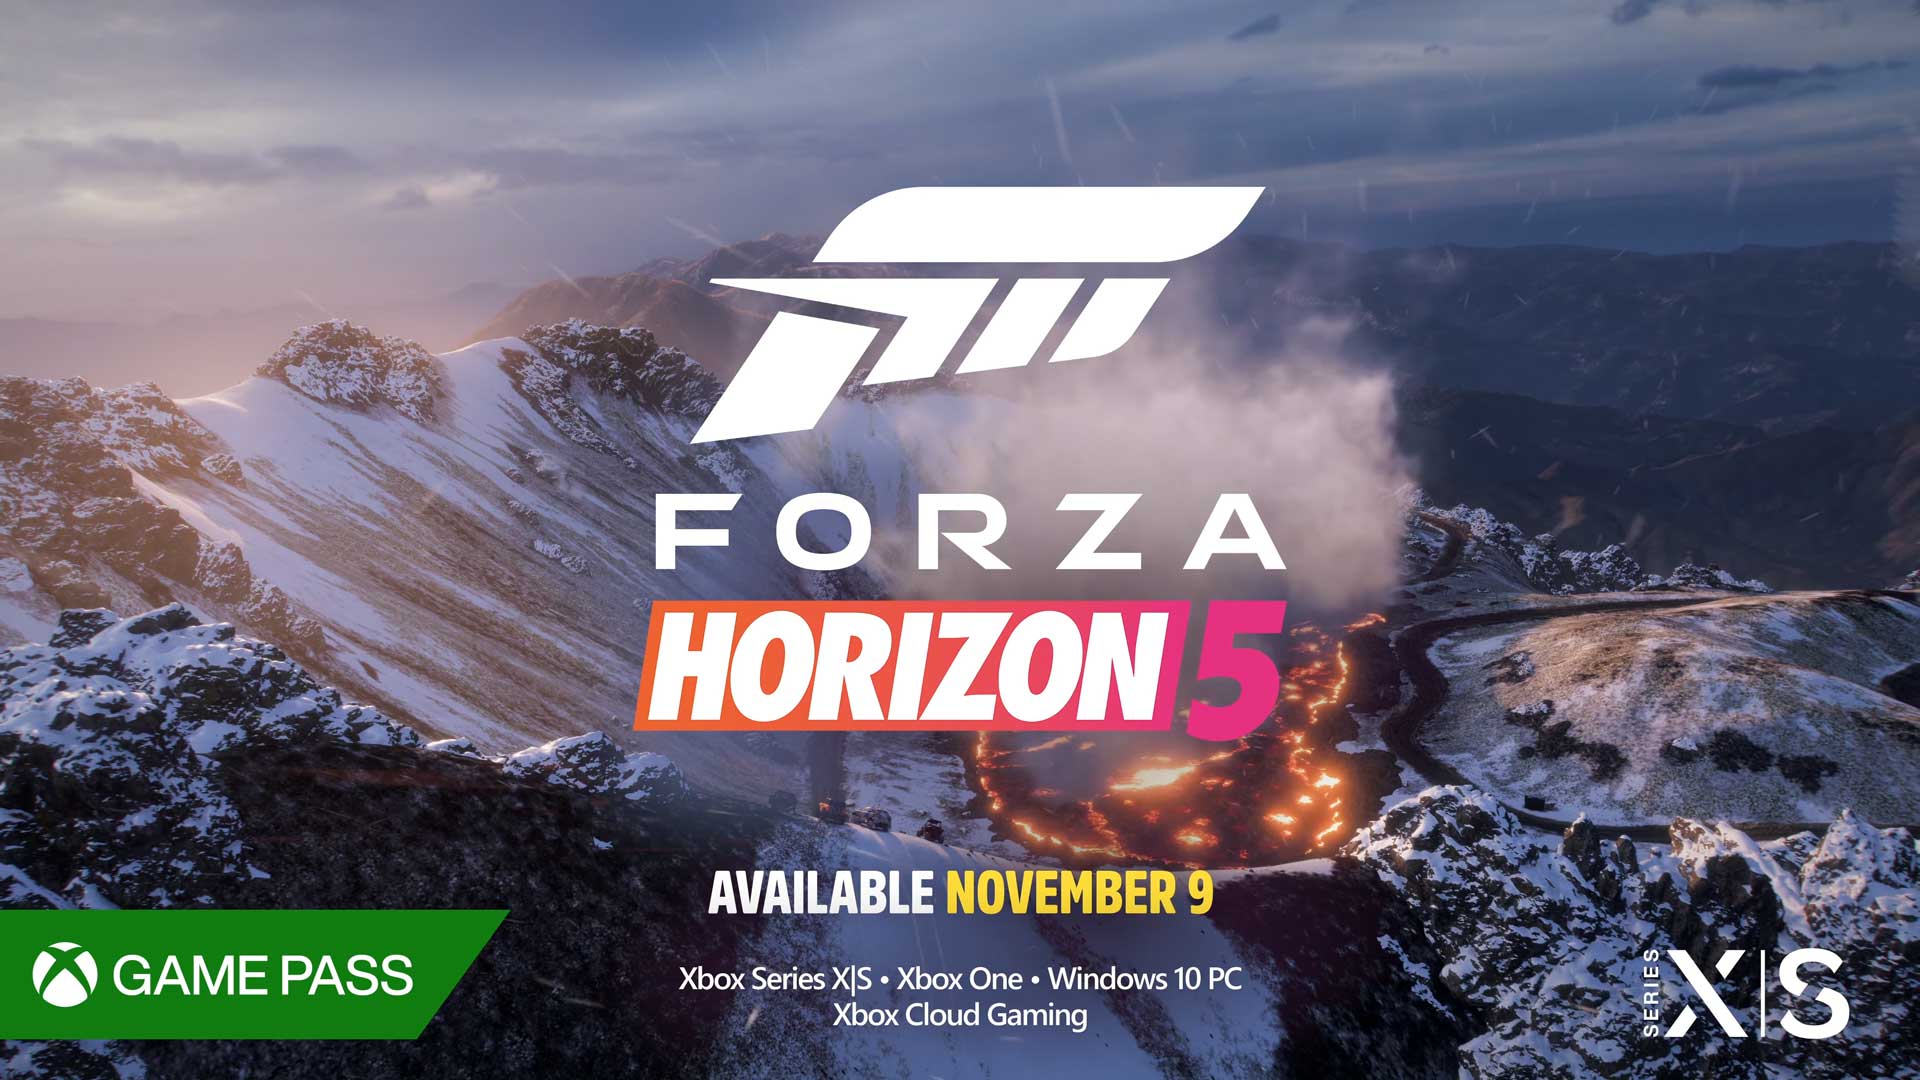 release date for forza motorsport 8